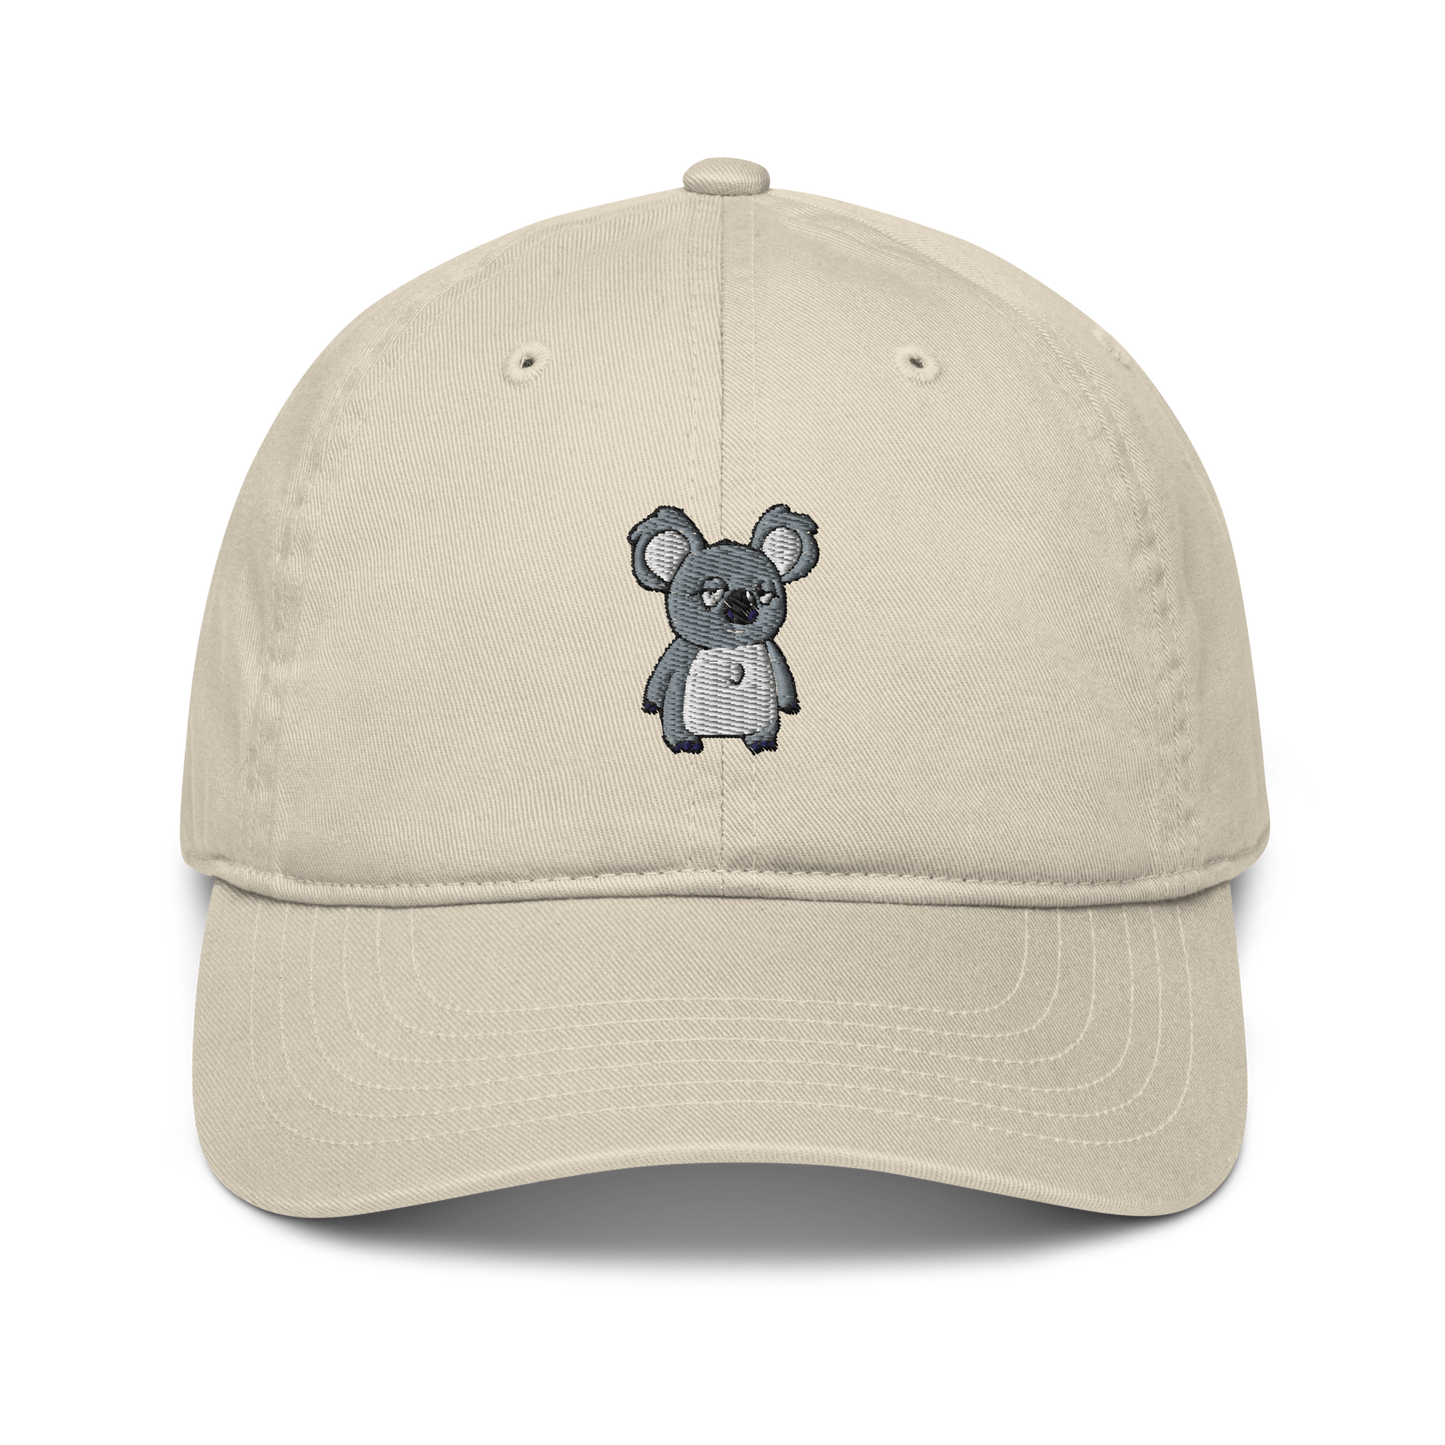 feat. K-Dude Club - Organic dad hat (embroidered)